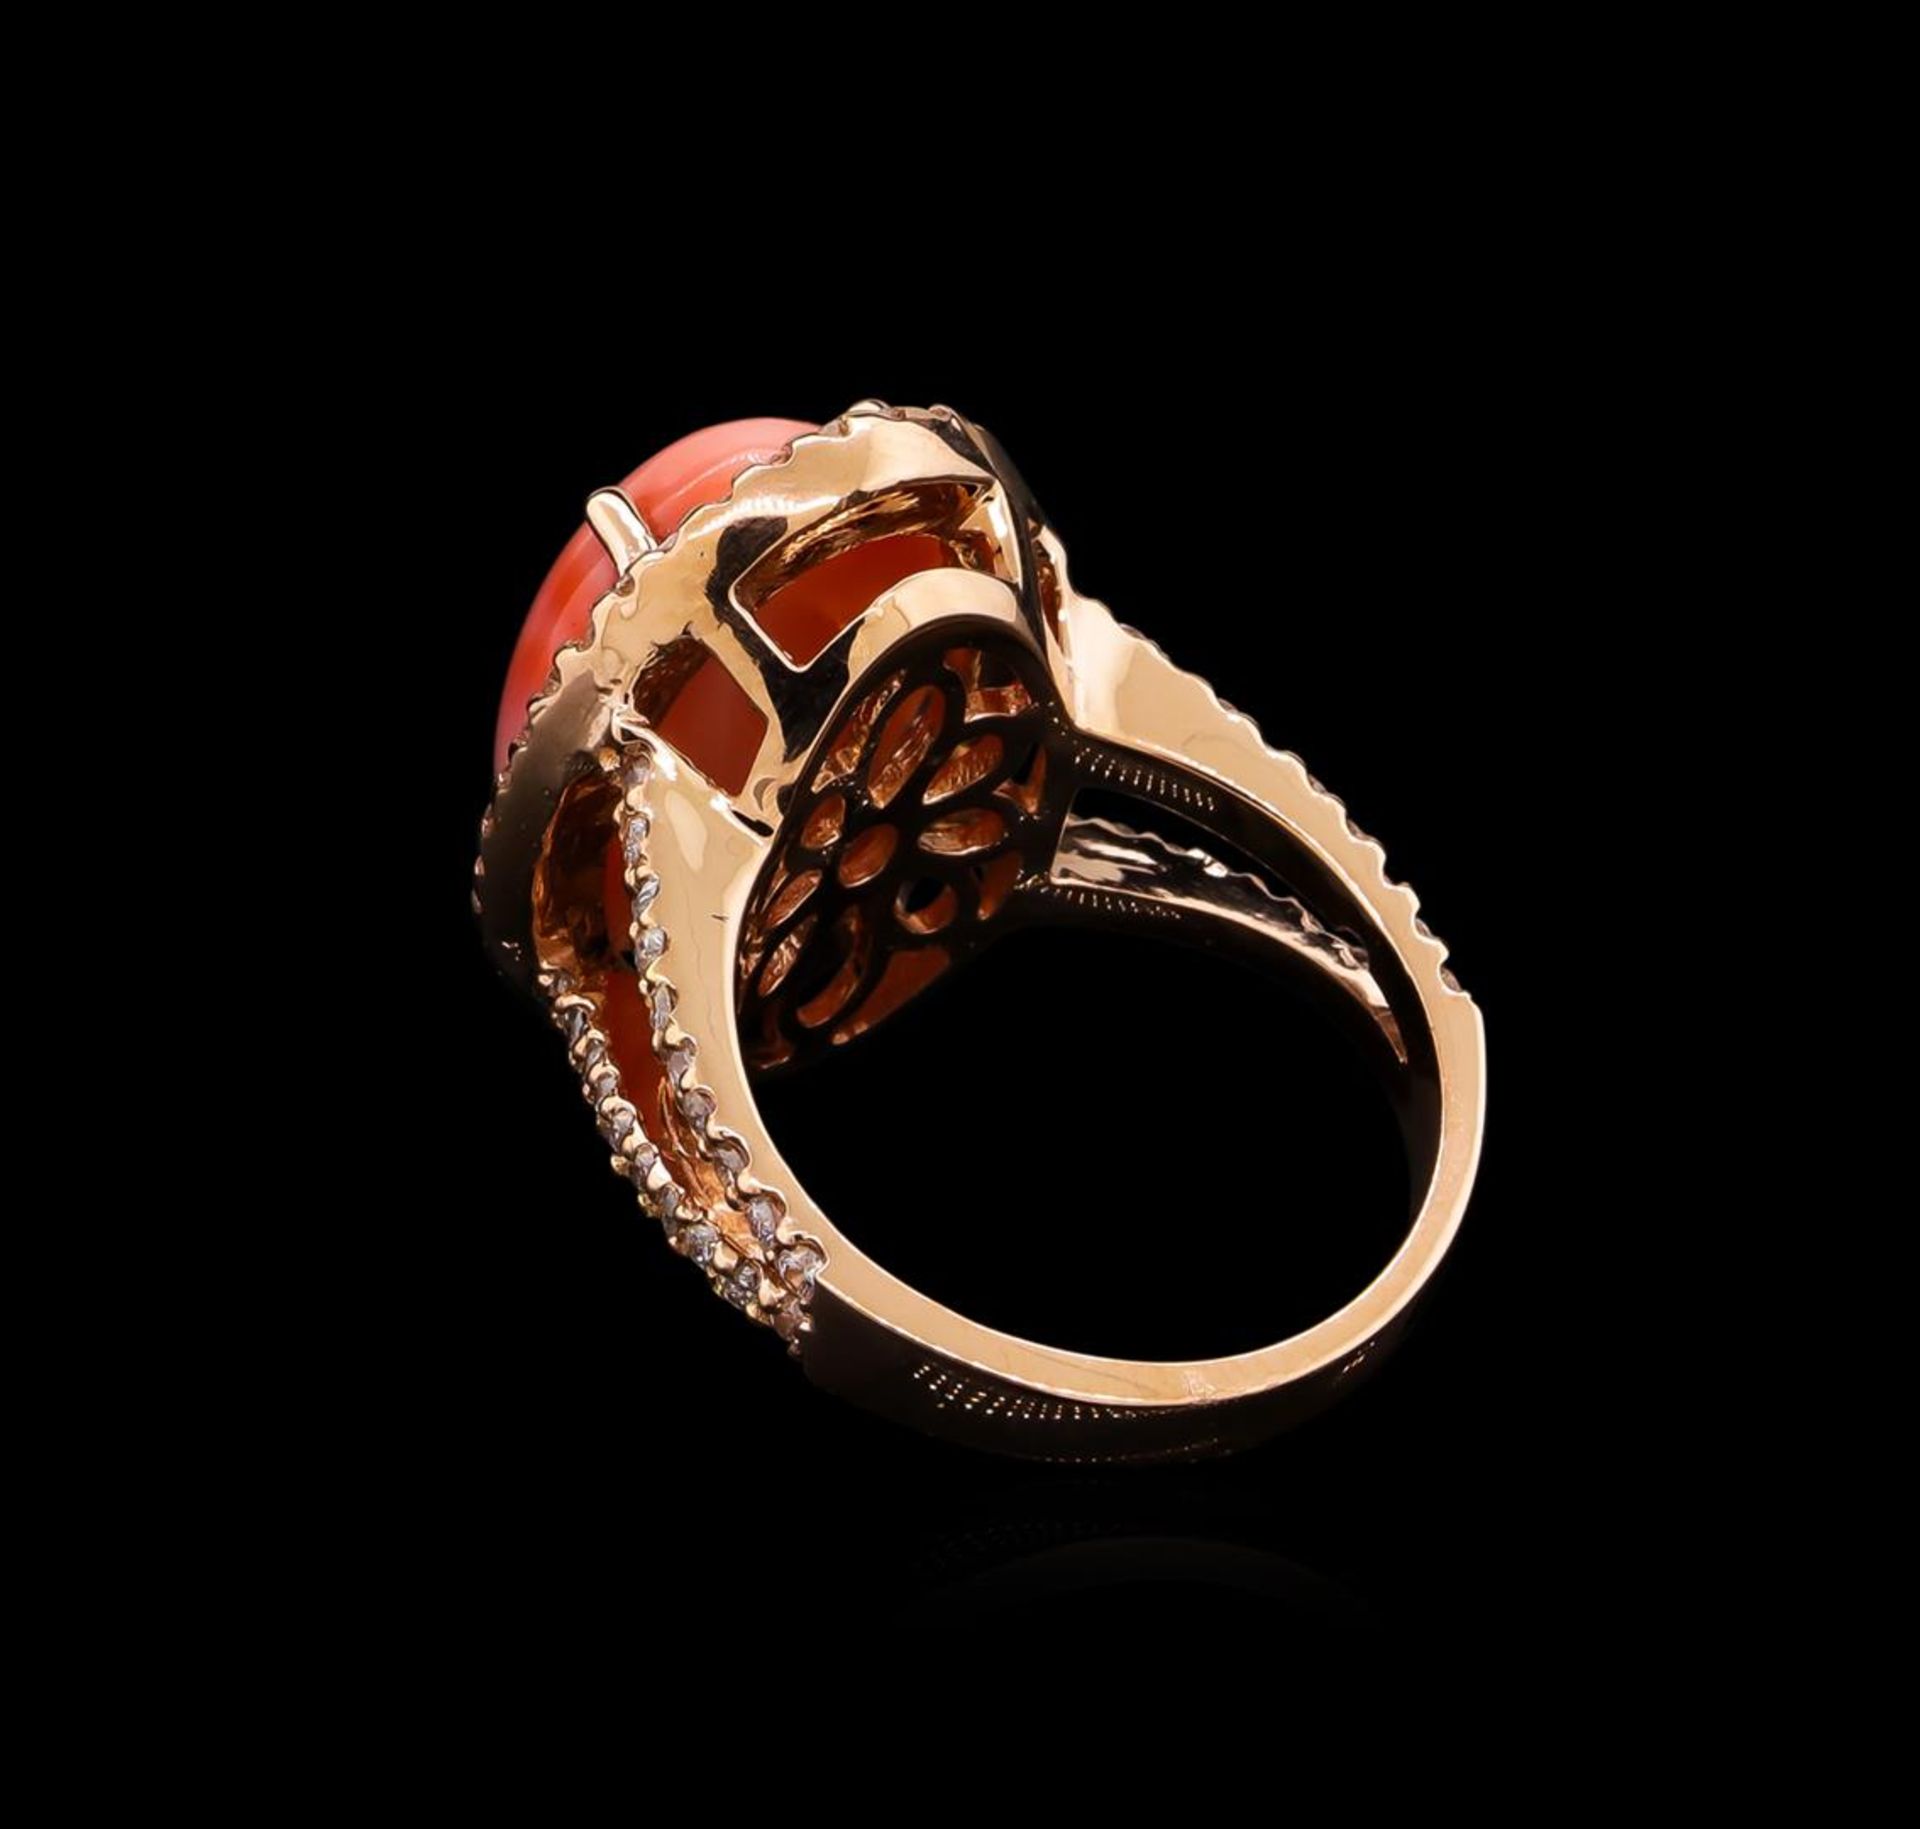 7.78 ctw Coral and Diamond Ring - 14KT Rose Gold - Image 3 of 4